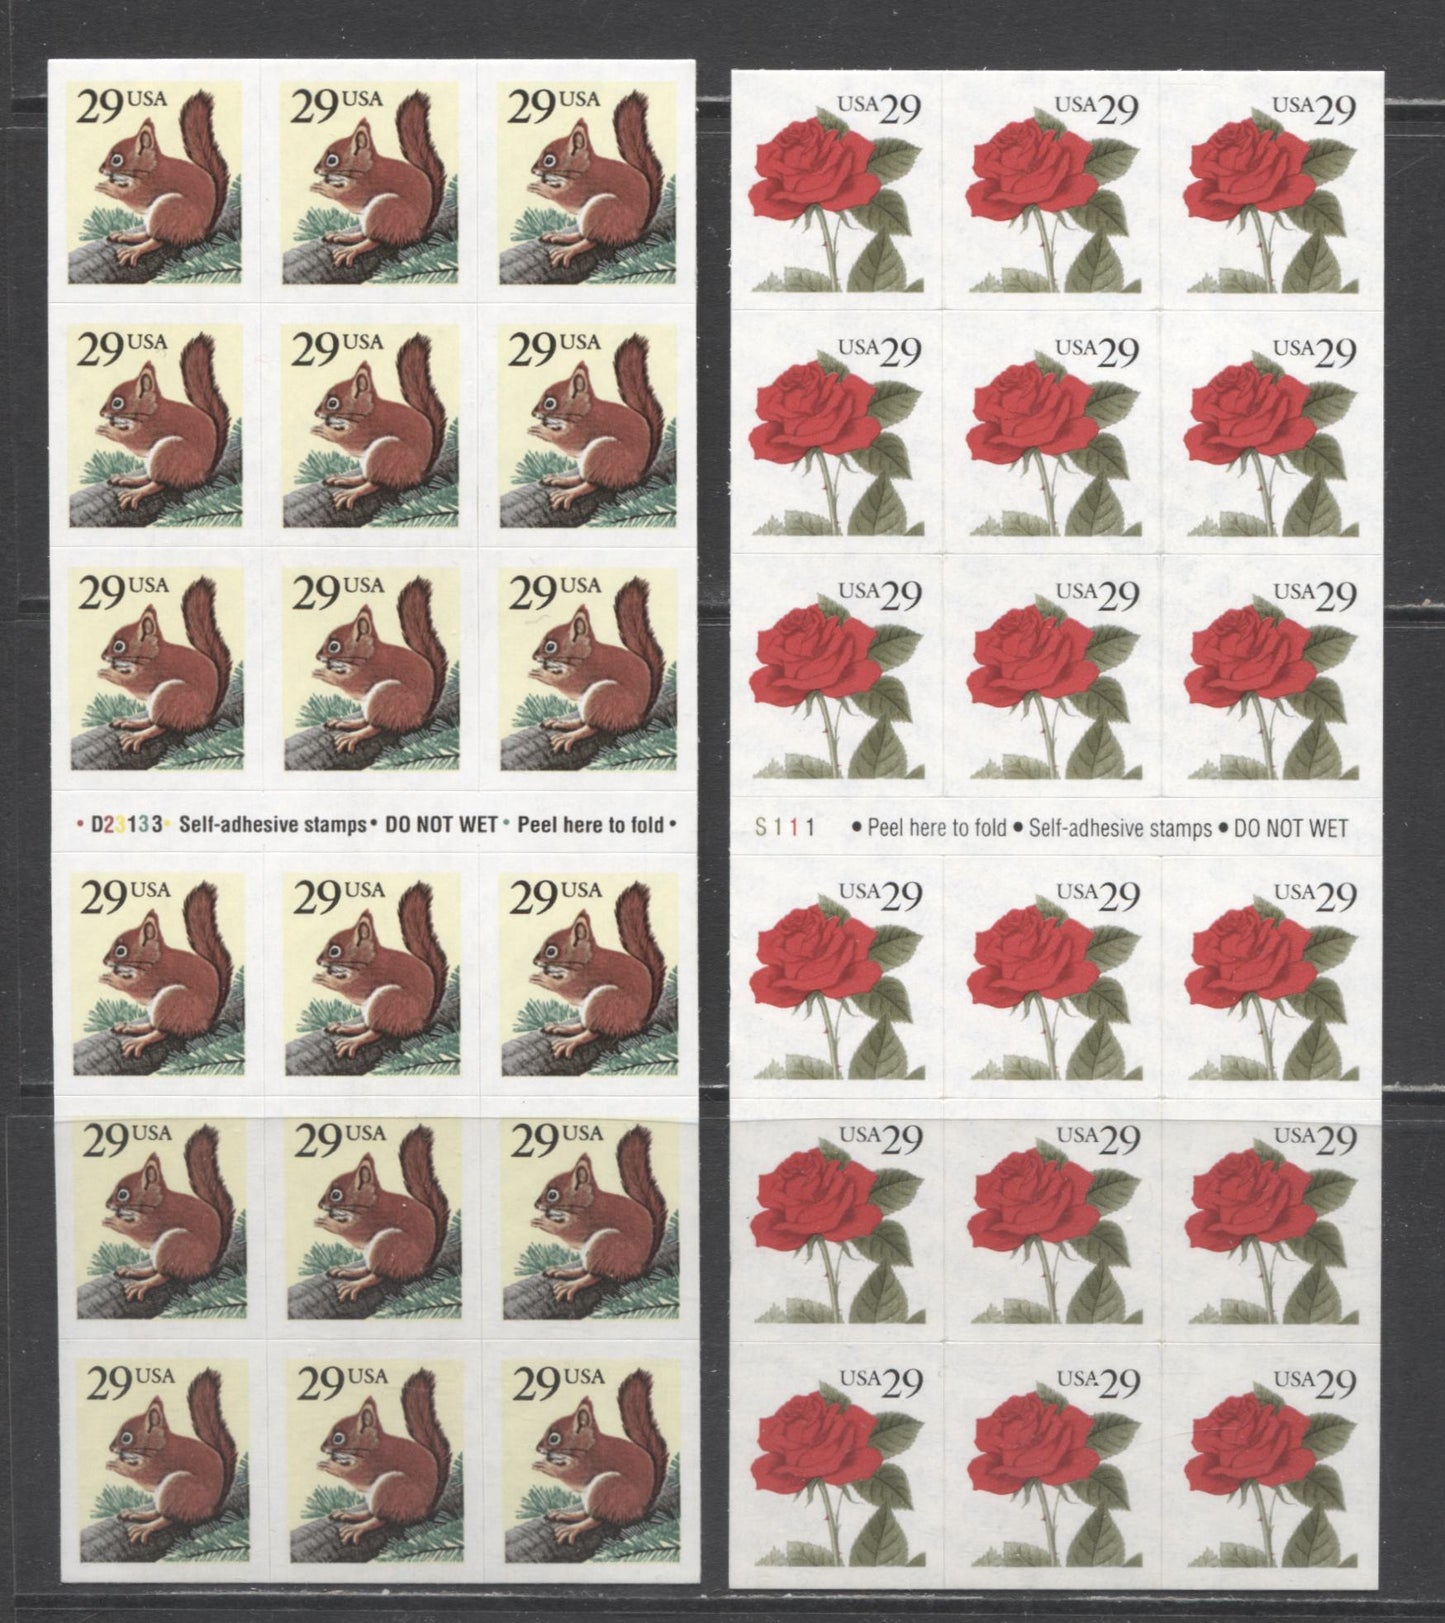 Lot 86 United States SC#2489a-2490a 1993-1995 Definitives, 2 VFNH Booklets Of 18, Click on Listing to See ALL Pictures, 2017 Scott Cat. $24